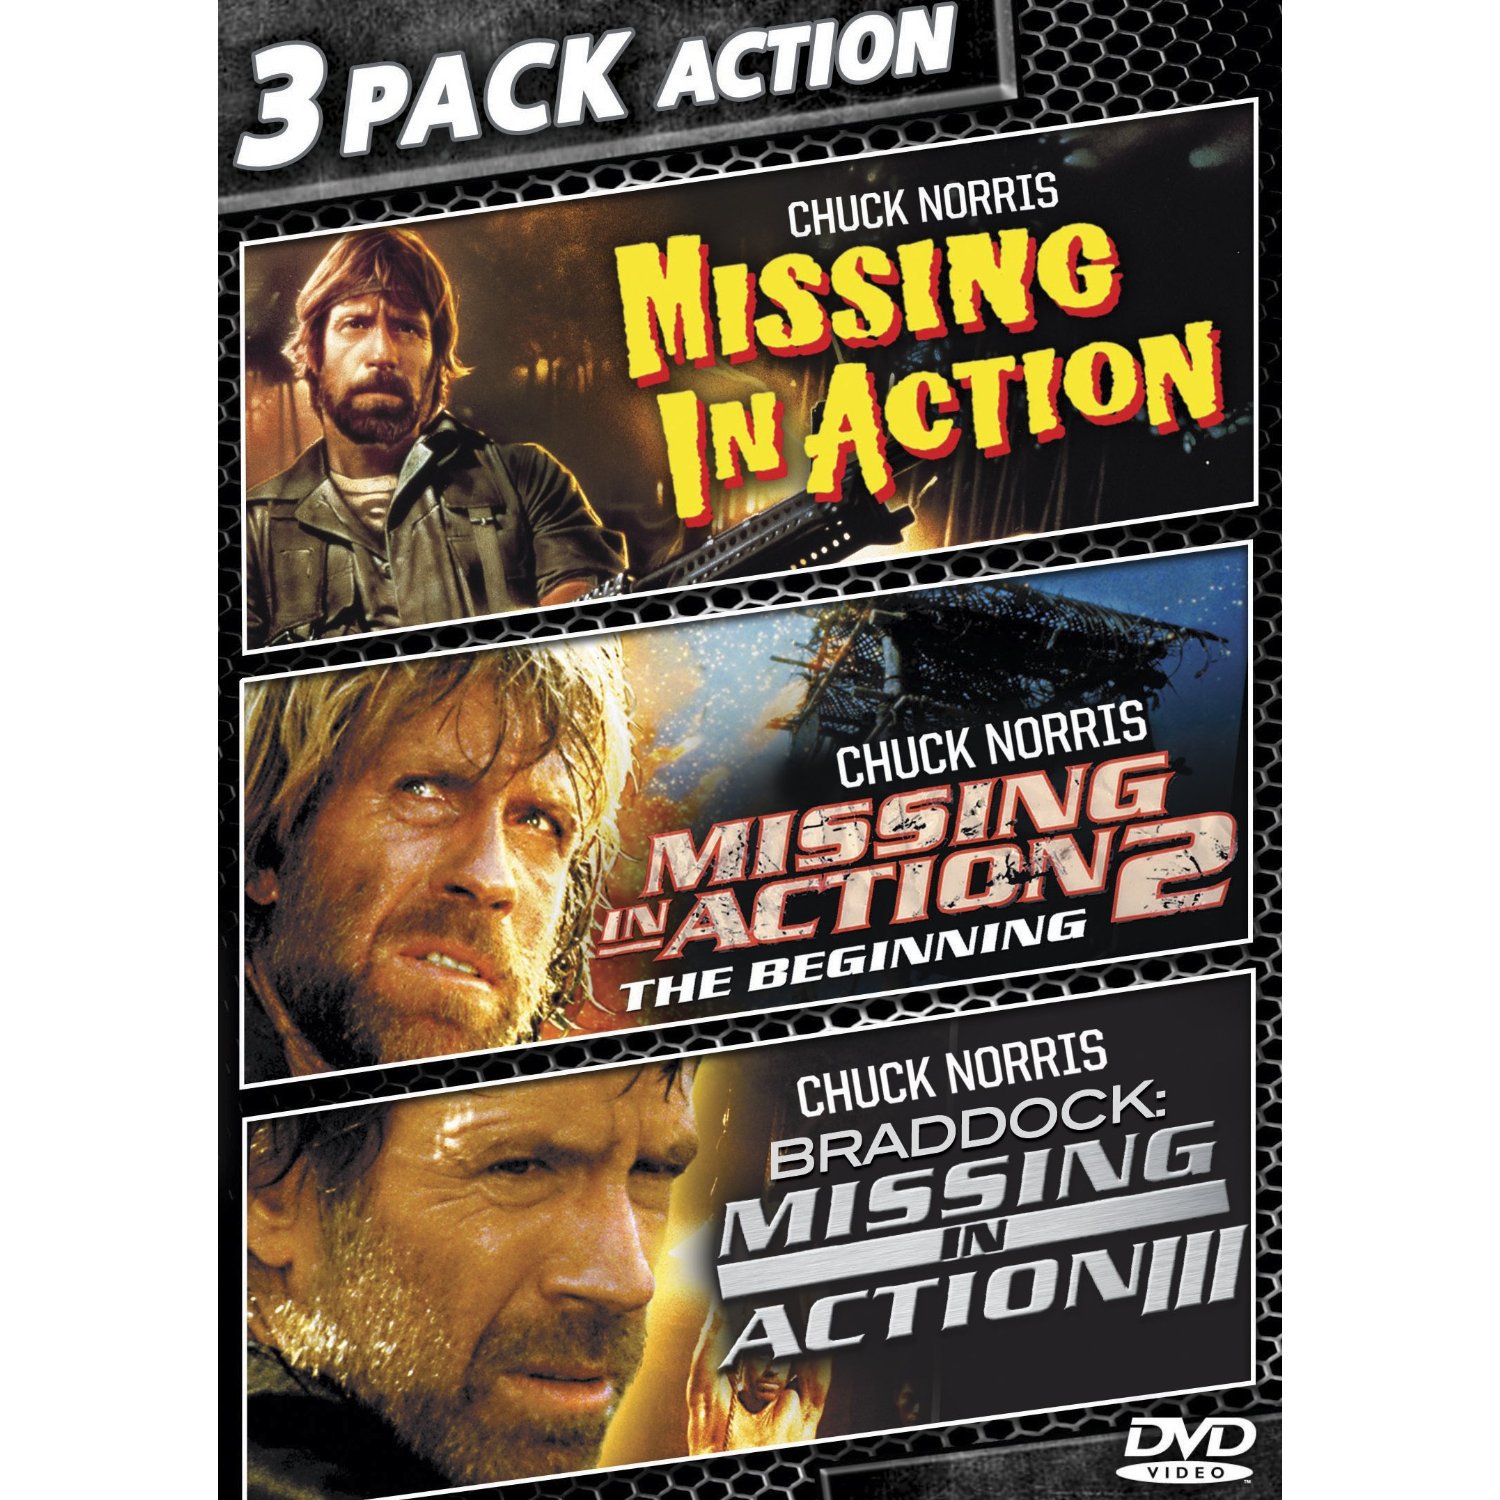 Missing in Action 1, 2, & 3